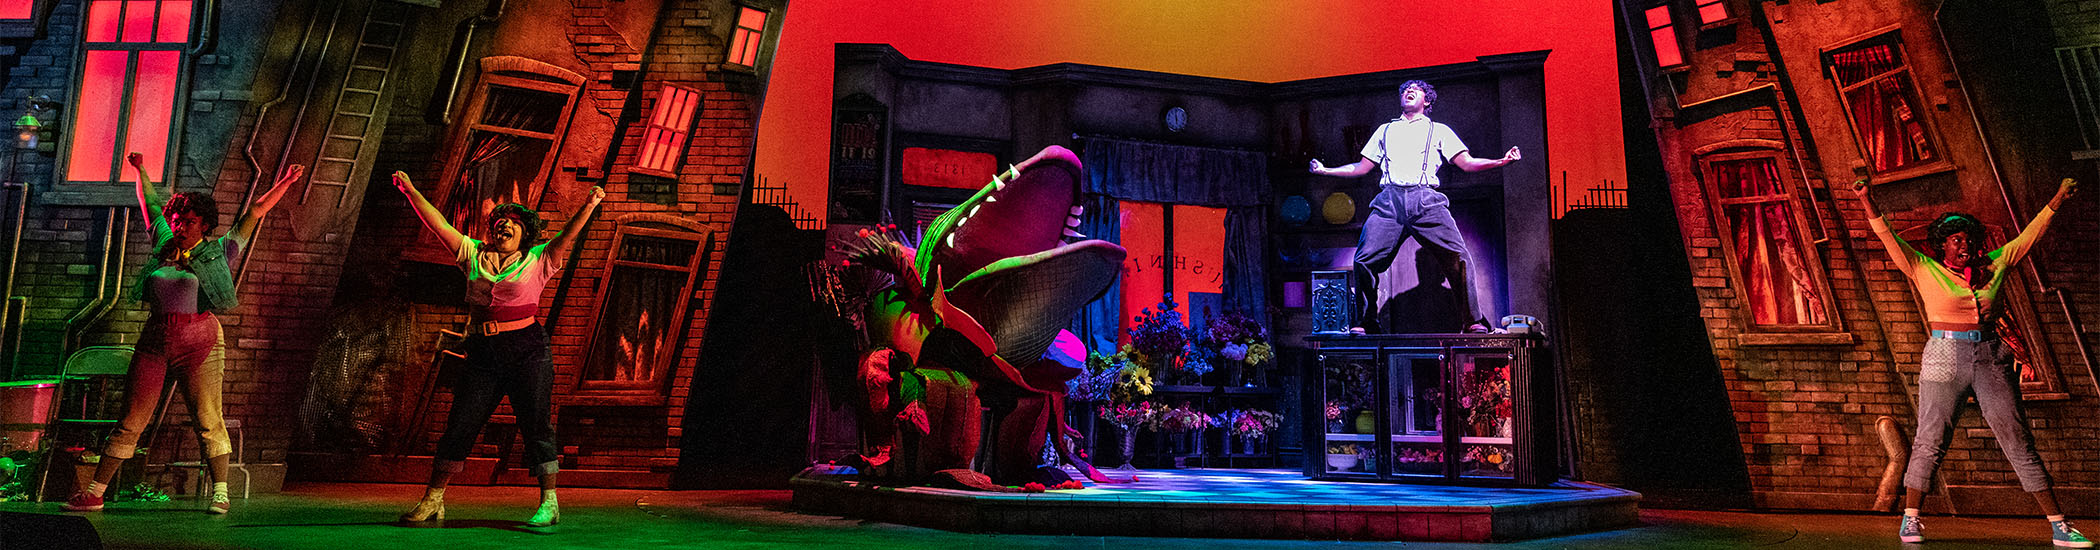 Rochelle Laplante, Ali Watson, Tenaj Williams, and Ivy Charles in Little Shop of Horrors, 2023: set design by Beyata Hackborn; costume design by Carmen Alatorre; lighting design by Rebecca Picherack; photo by Moonrider Productions for the Arts Club Theatre Company